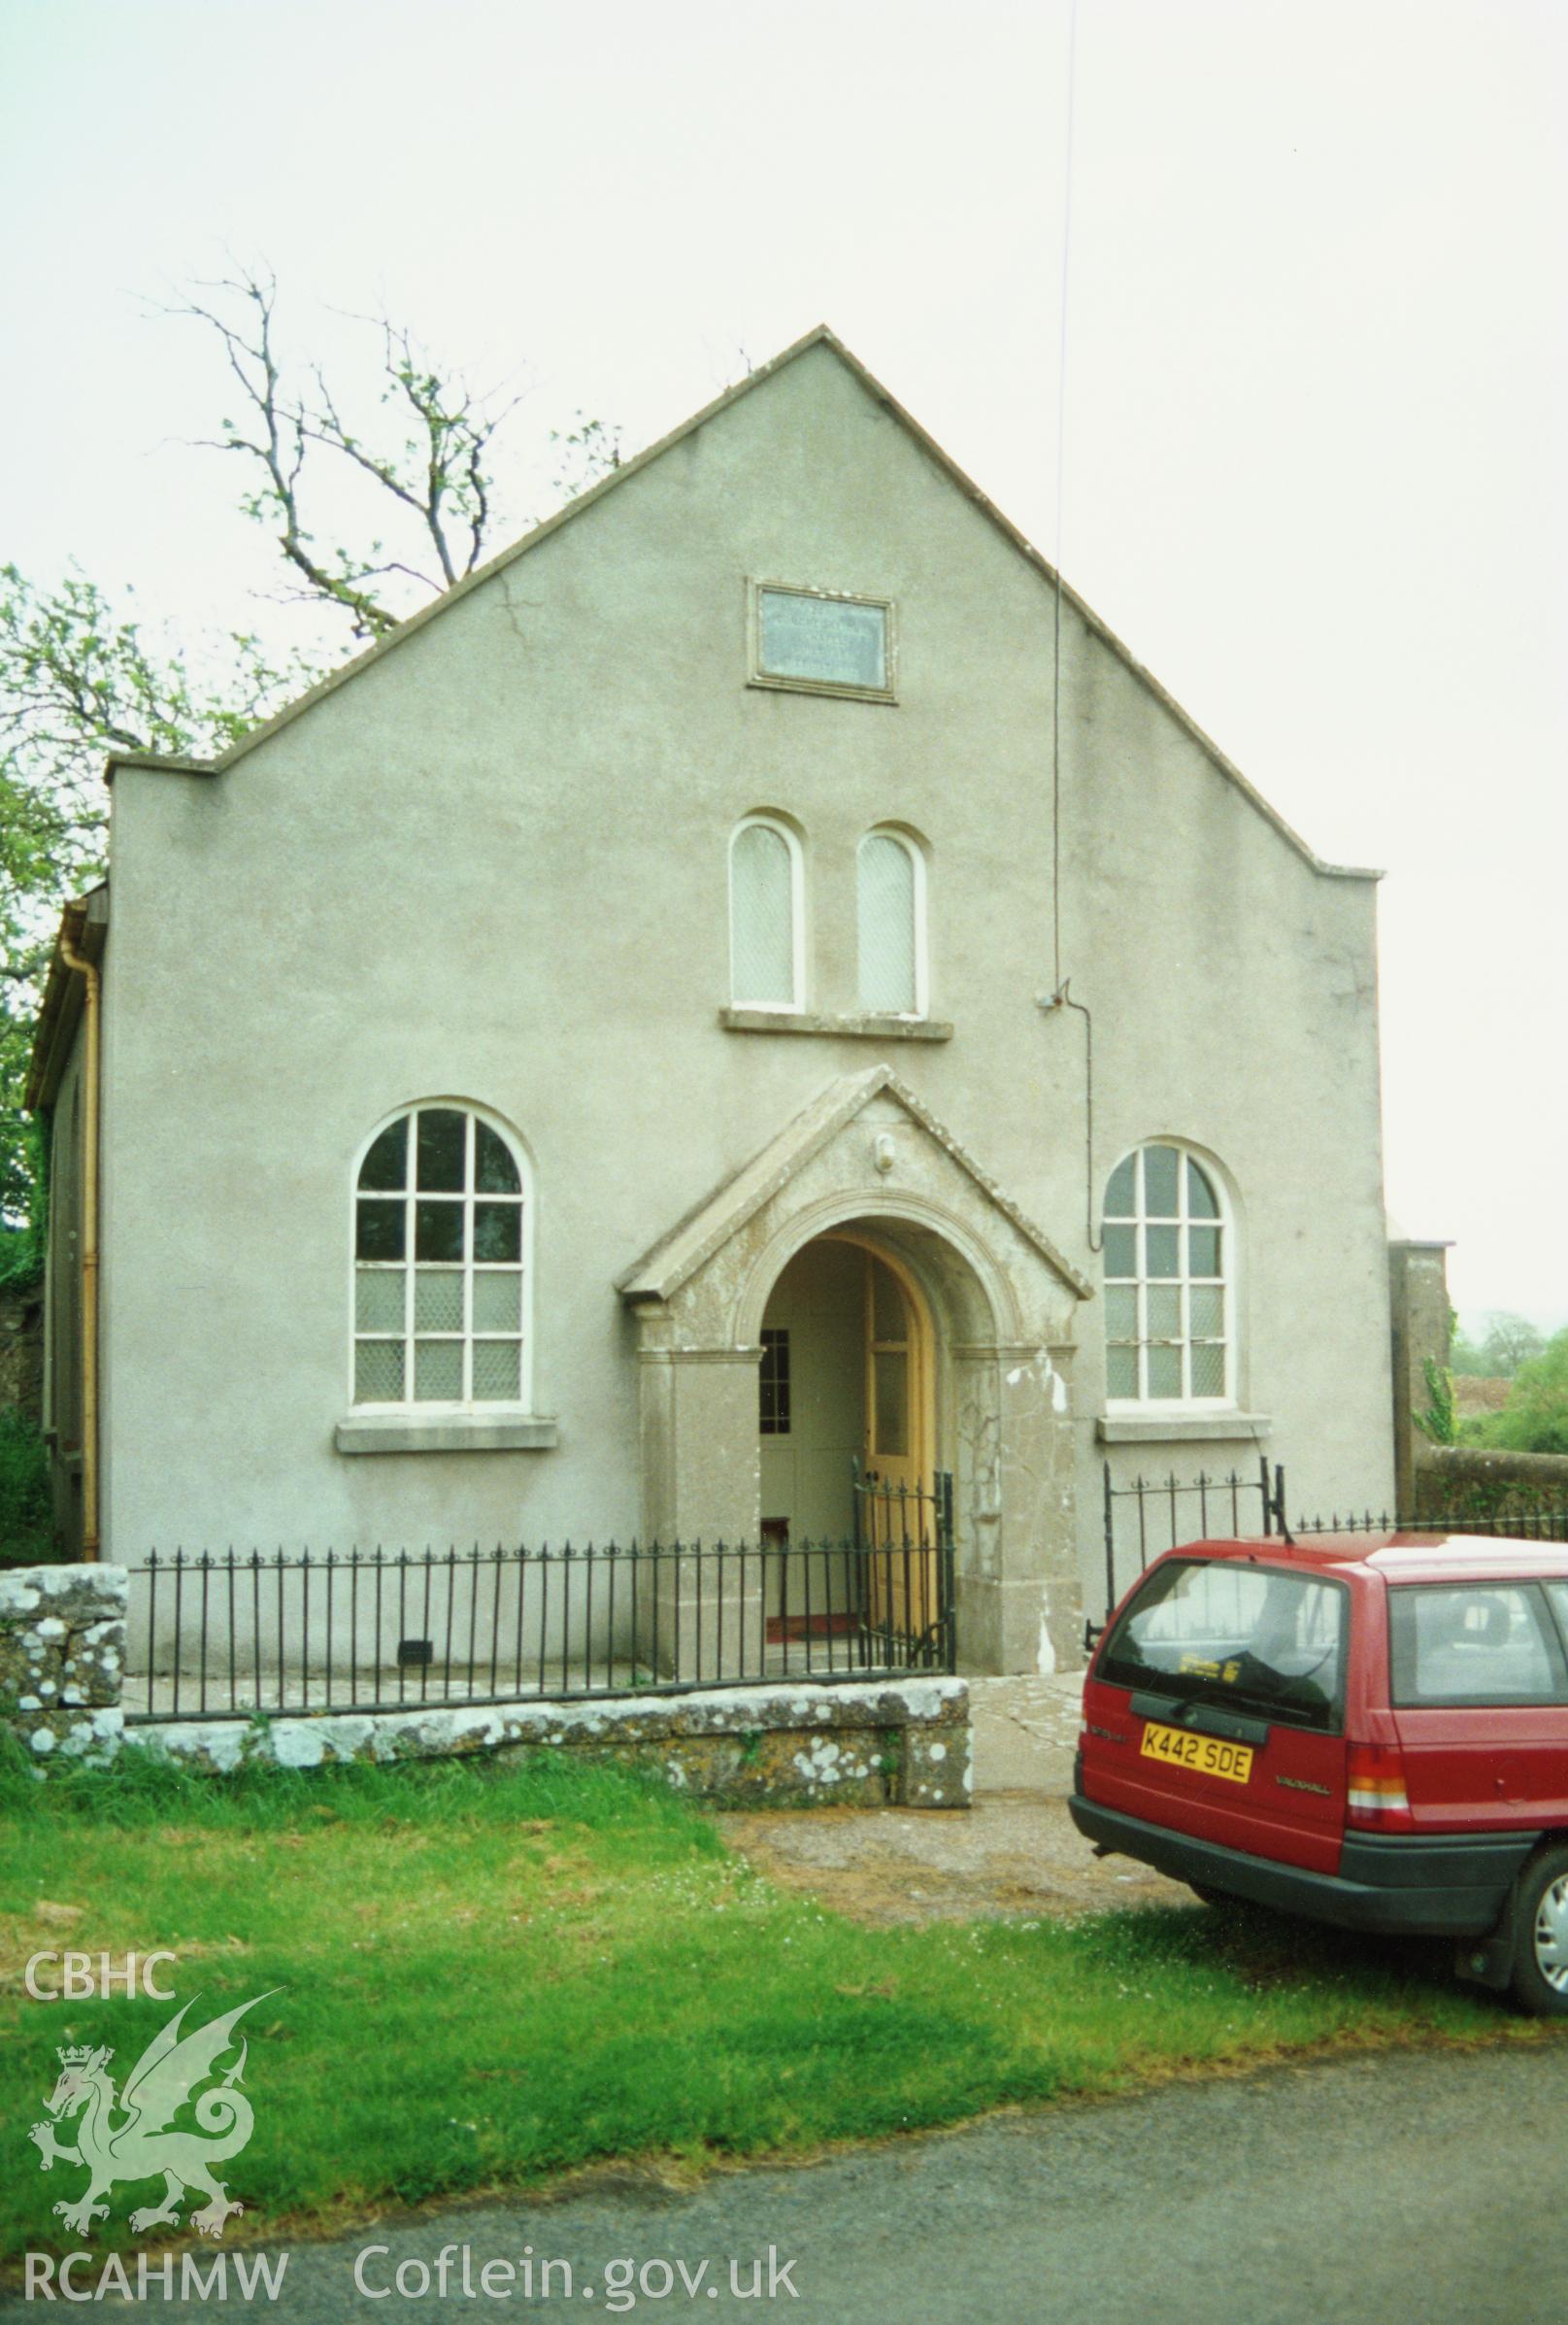 Digital copy of a colour photograph showing exterior view of Zoar Independent Chapel, Carew Newton, taken by Robert Scourfield, 1996.